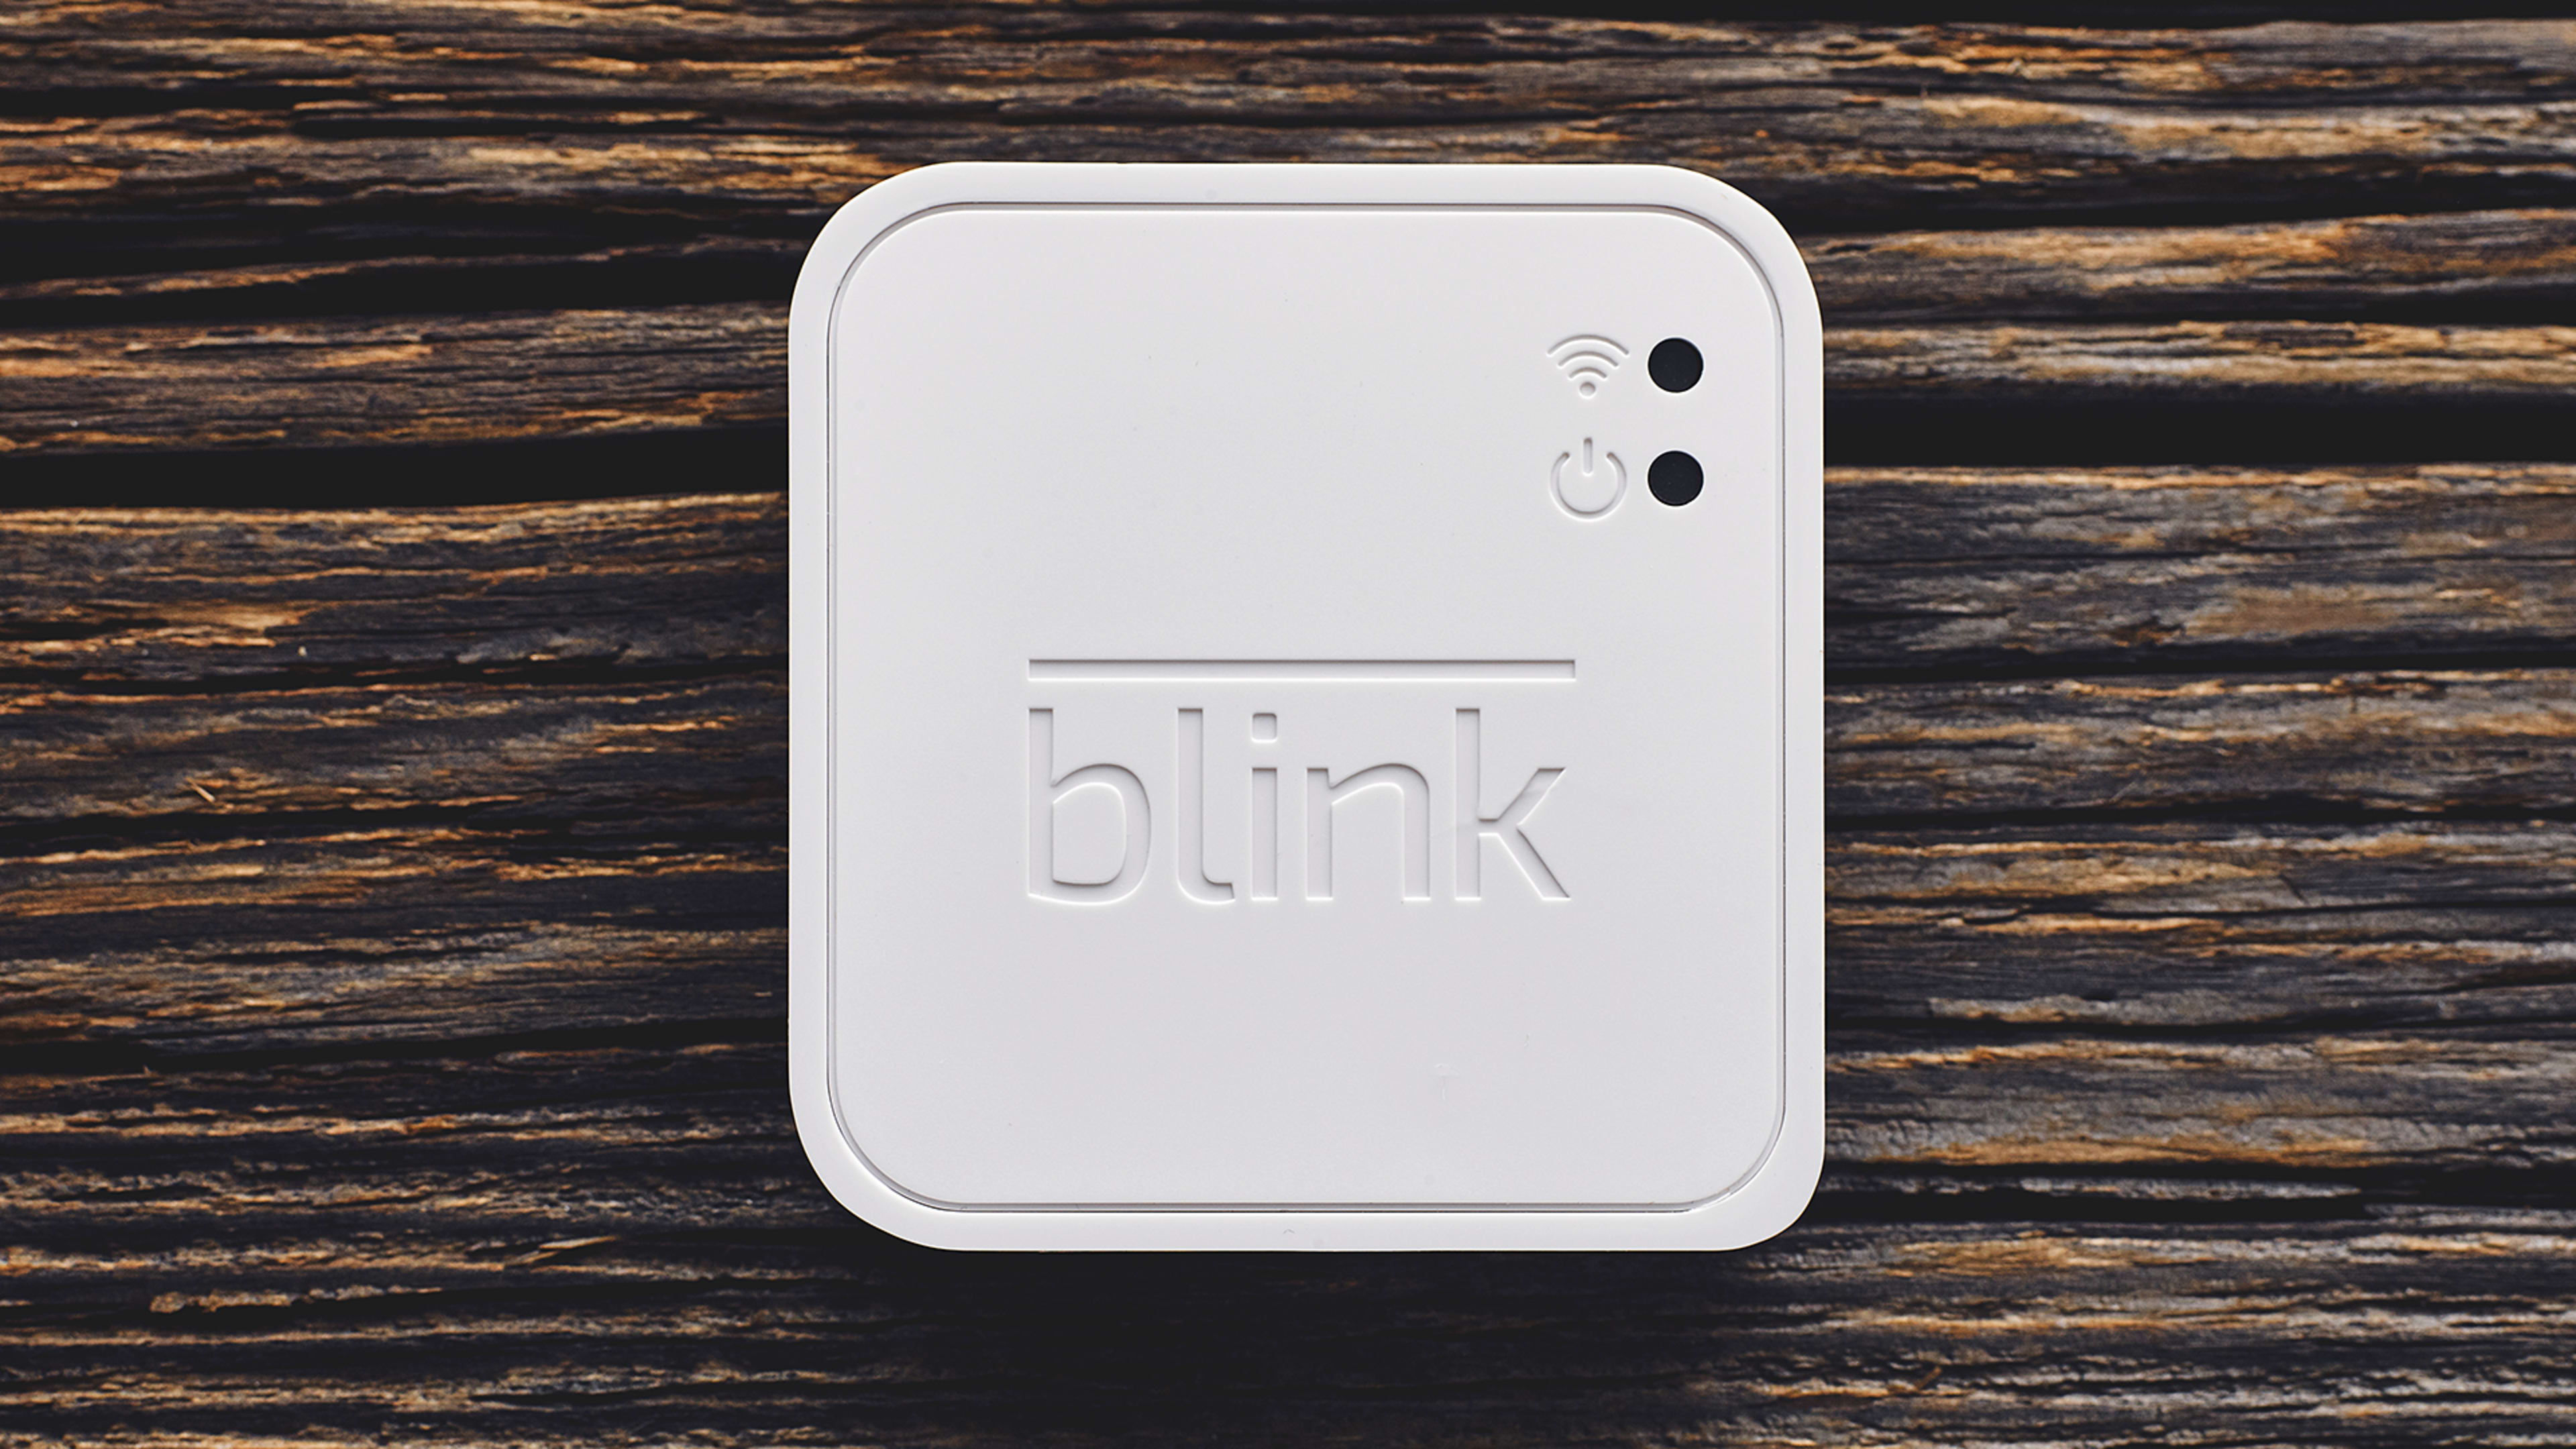 Amazon reportedly paid $90 million for Blink’s chip technology